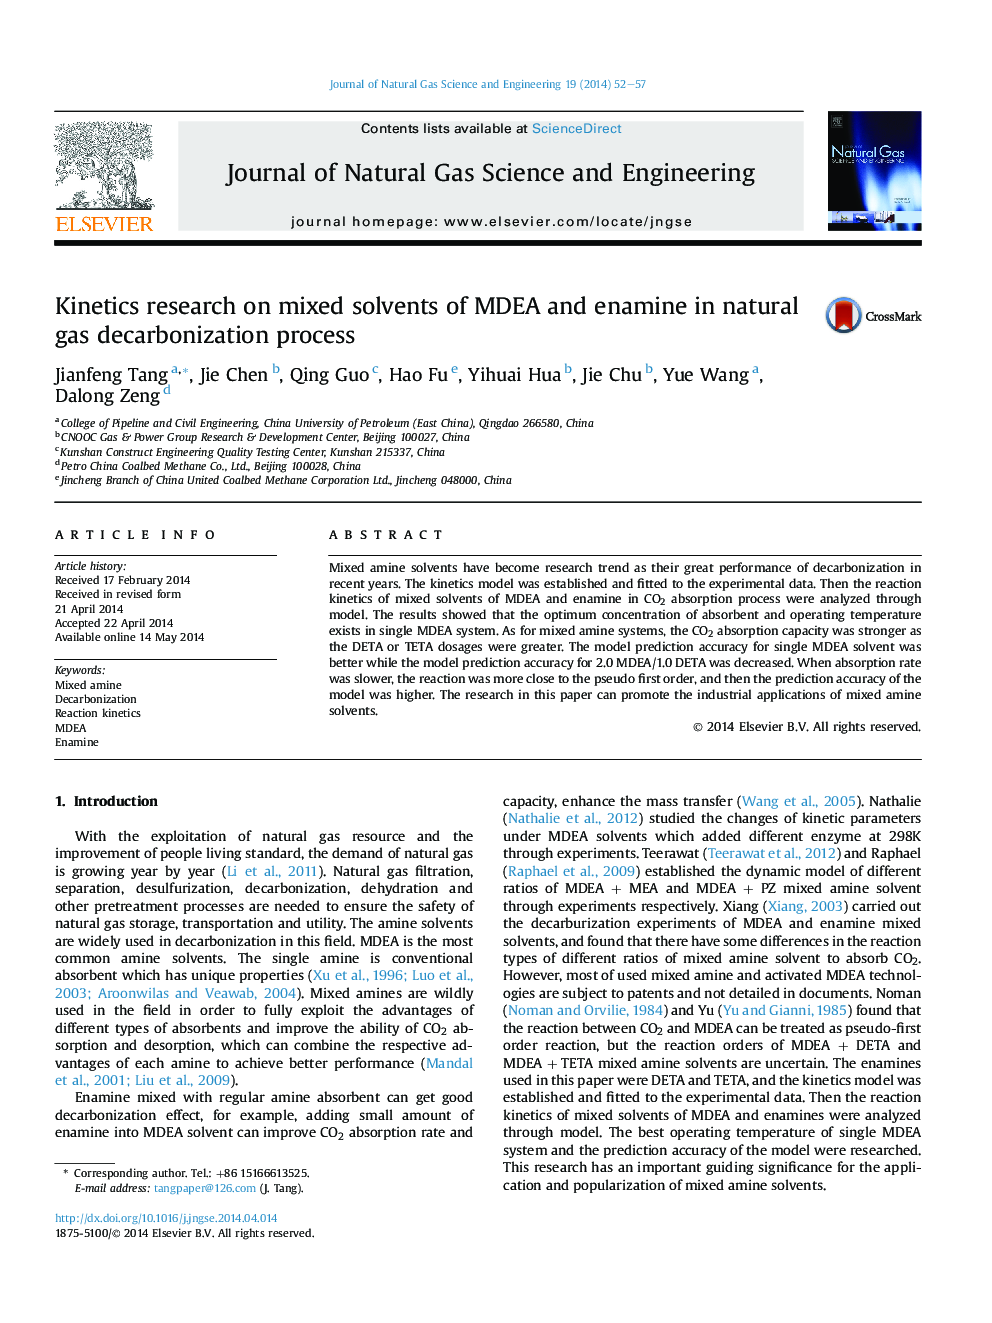 Kinetics research on mixed solvents of MDEA and enamine in natural gas decarbonization process